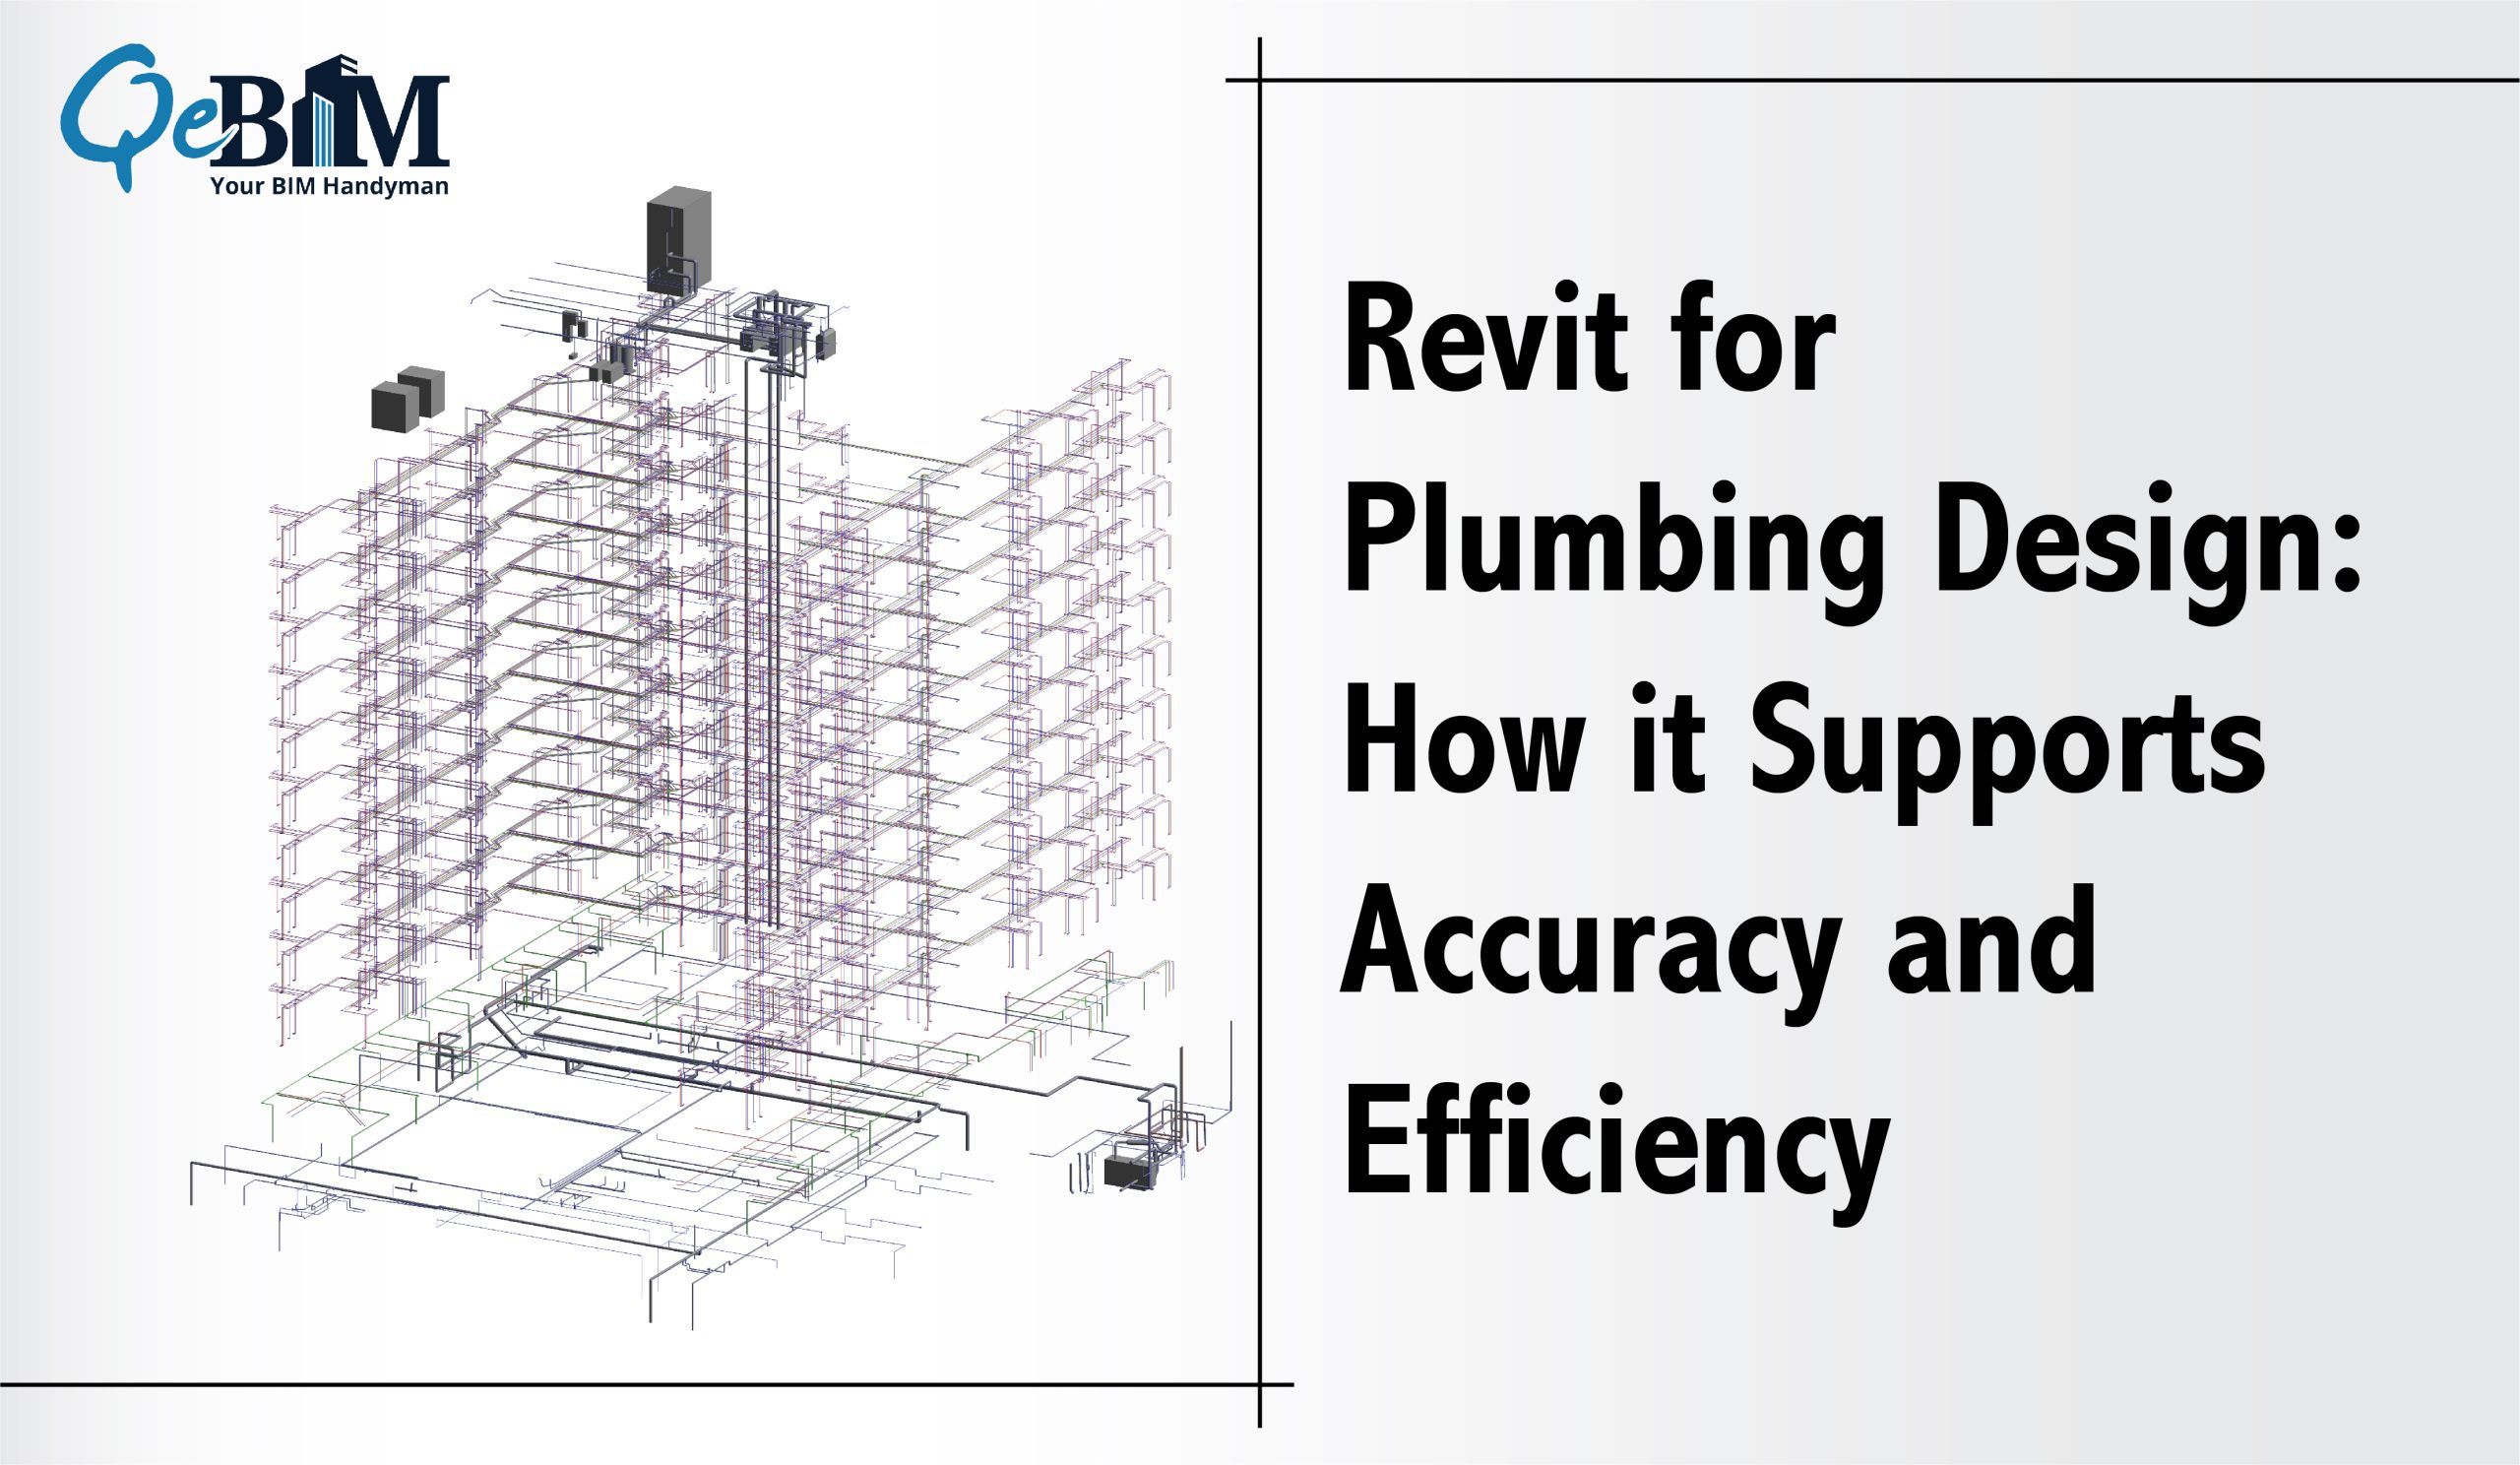 Revit for Plumbing Design: How it Supports Accuracy and Efficiency